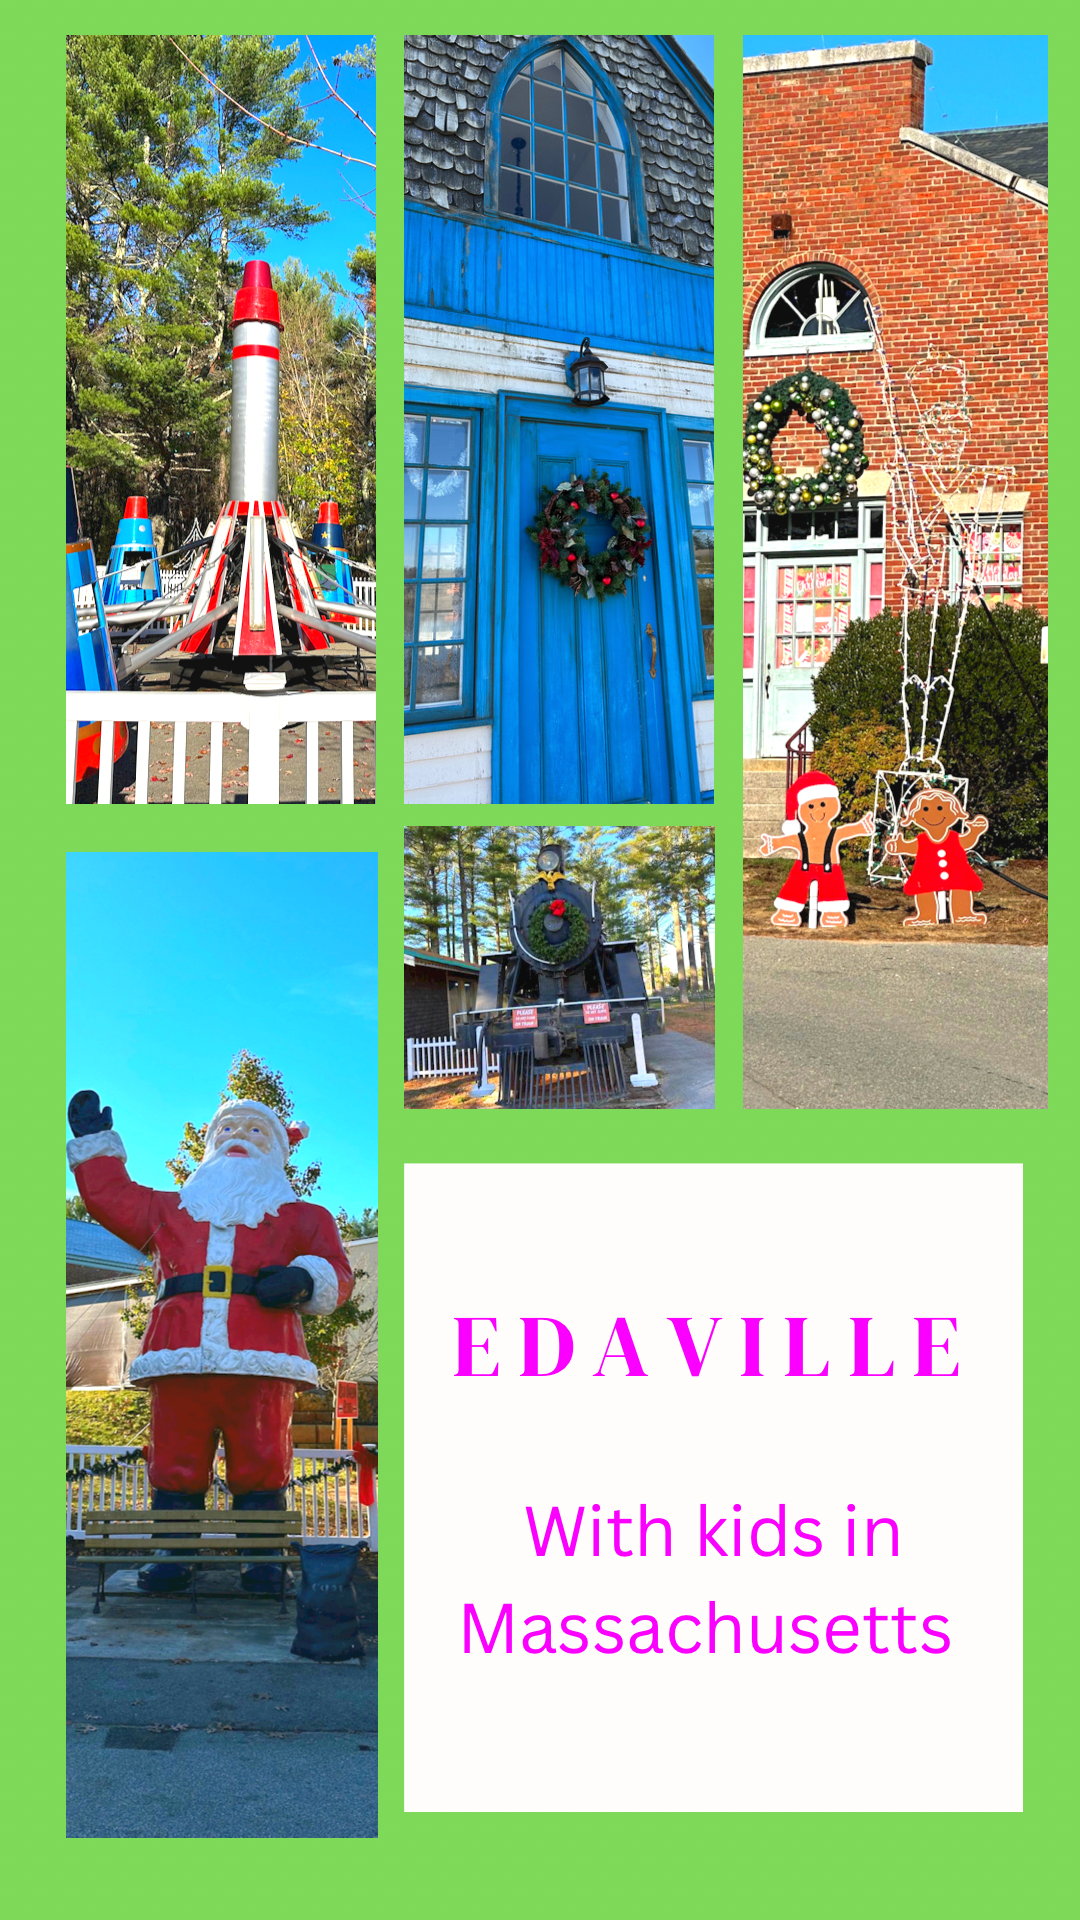 Edaville Family Theme Park in Carver, MA with kids